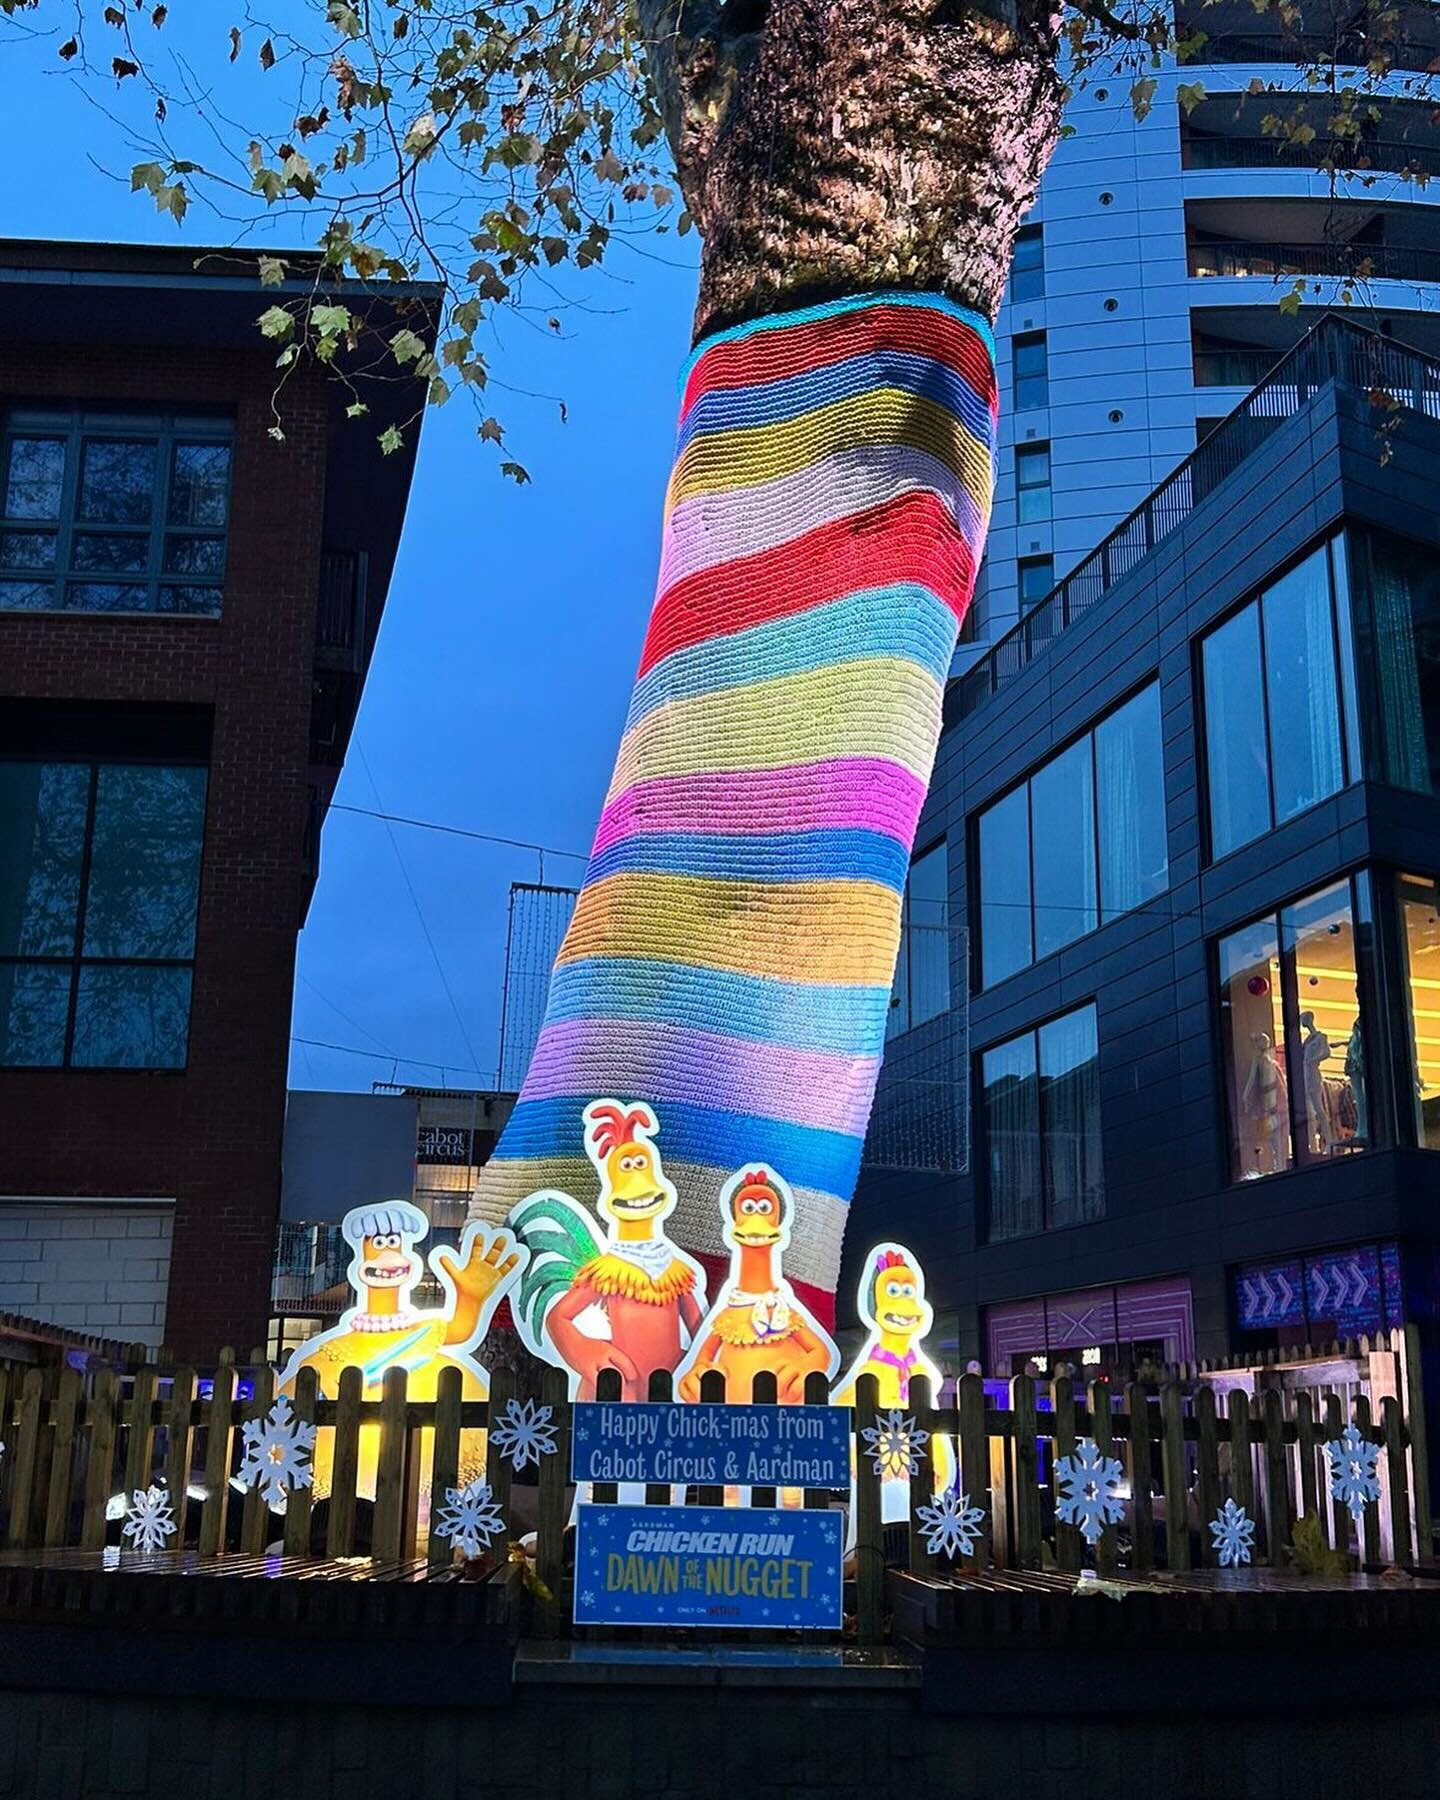 We loved creating this giant knitted project in Cabot Circus, Bristol, promoting Chicken Run: Dawn of the Nugget.

We yarn bombed this enormous tree with what started out as a 5 x 5.5 metre knitted panel. (Yes that is a looot of yarn!!) The panel was